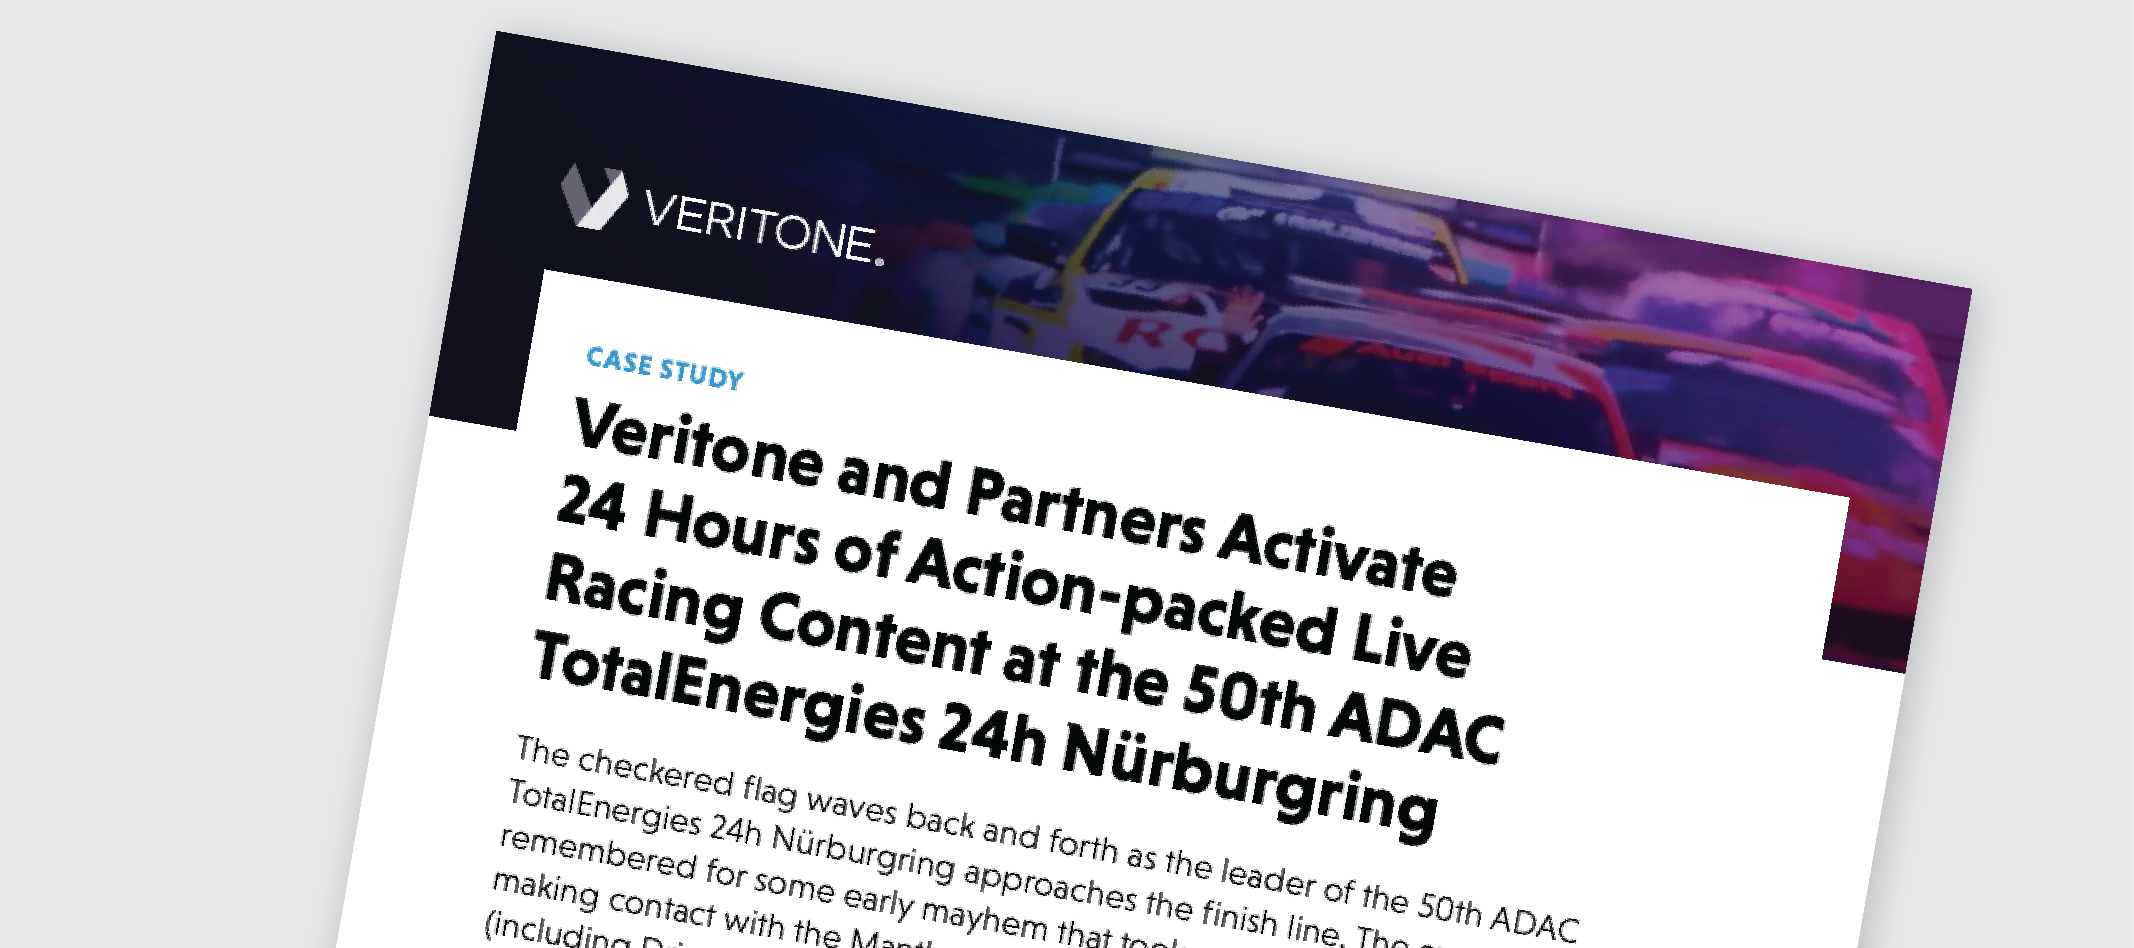 Veritone & Partners Activate 24 Hours of Action-packed Live Racing Content at the 50th ADAC TotalEnergies 24h Nürburgring 